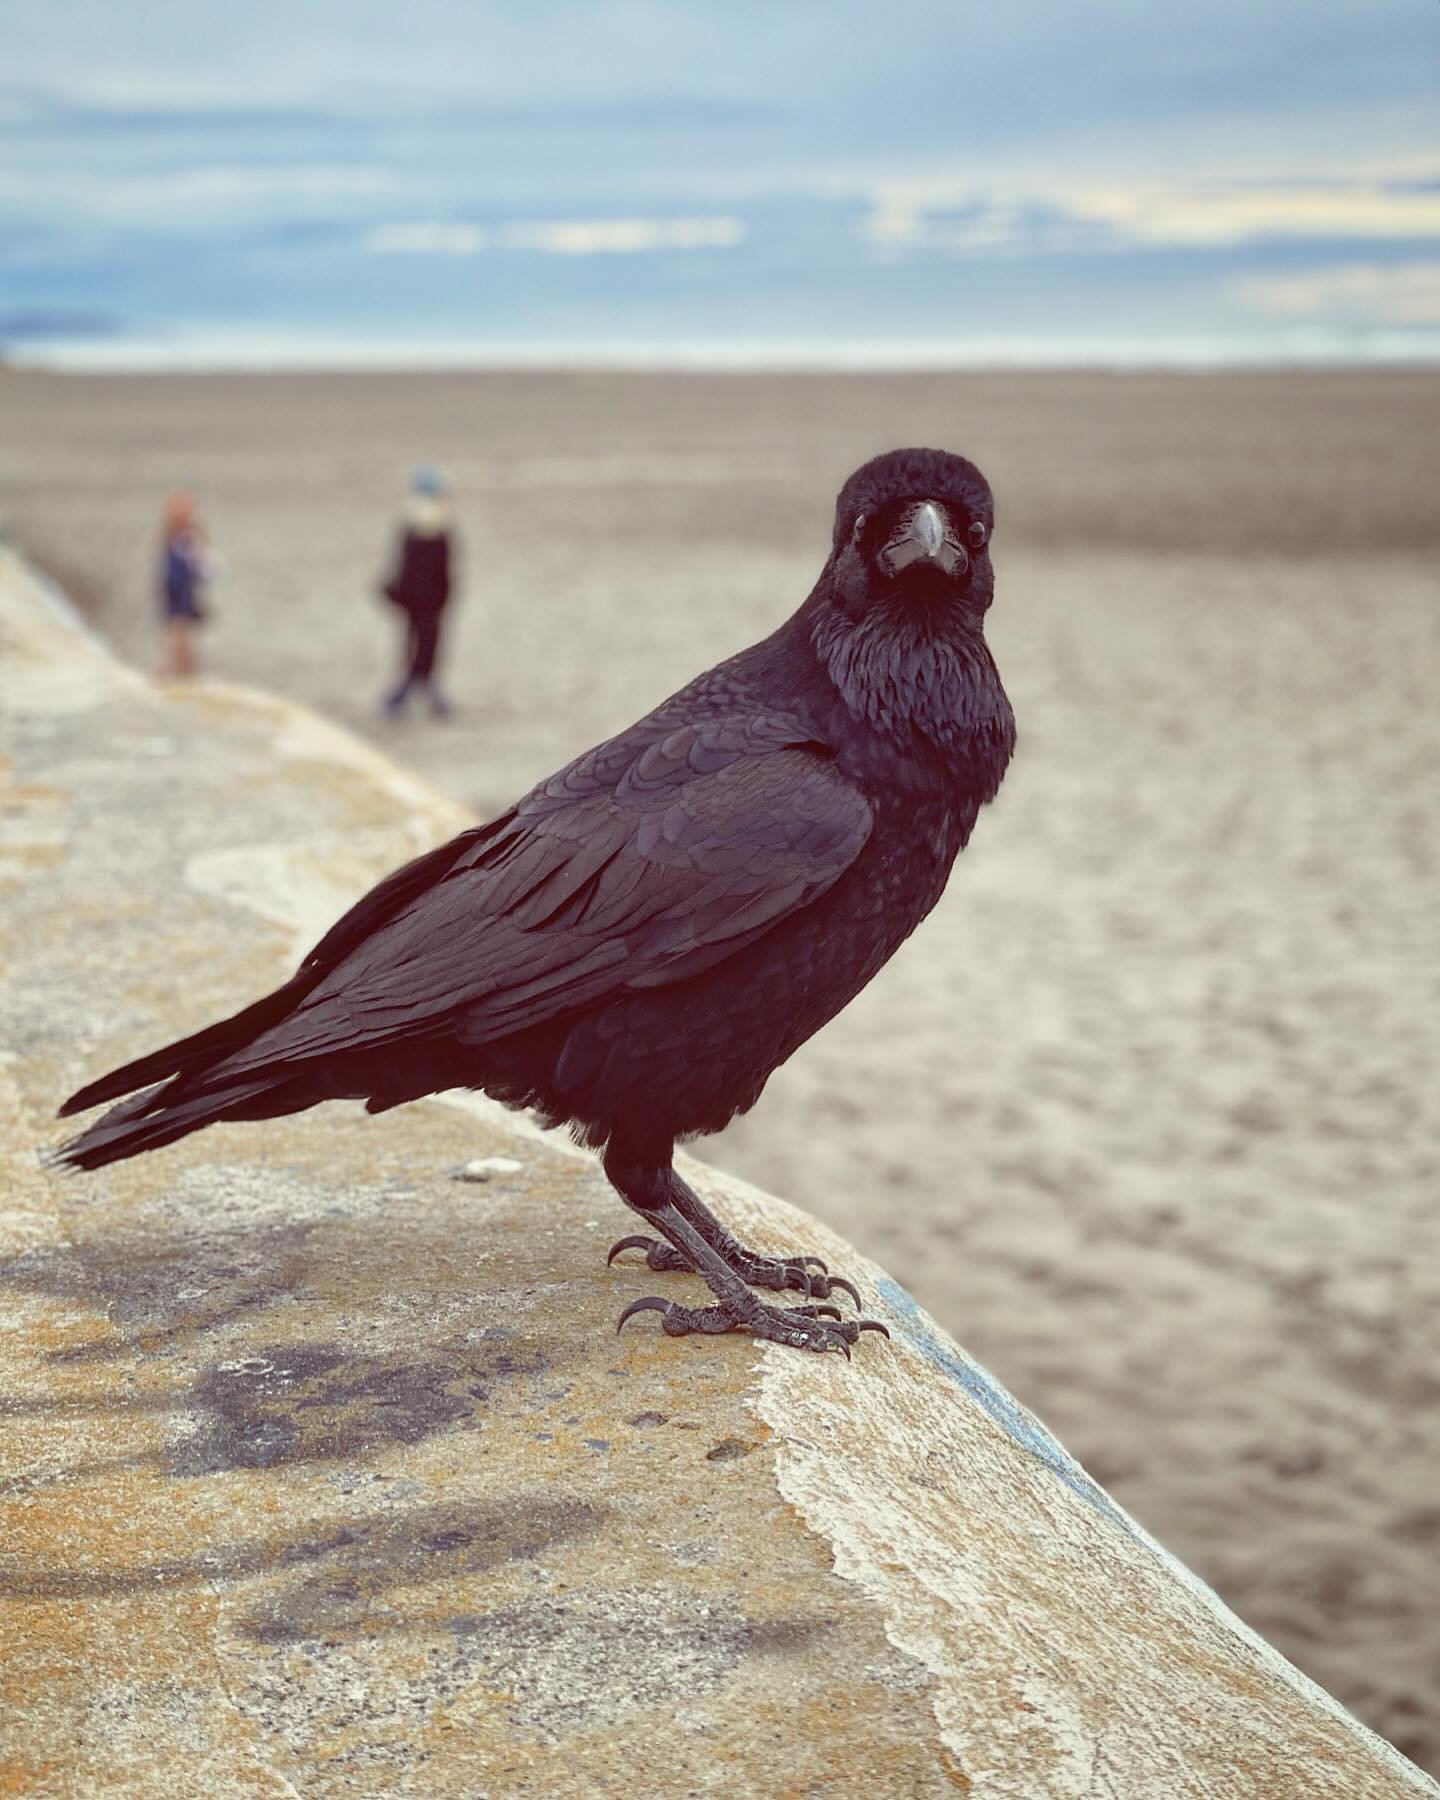 Met this little guy during surf check. #nofear #raven #ob #posingforthecamera #nofilter